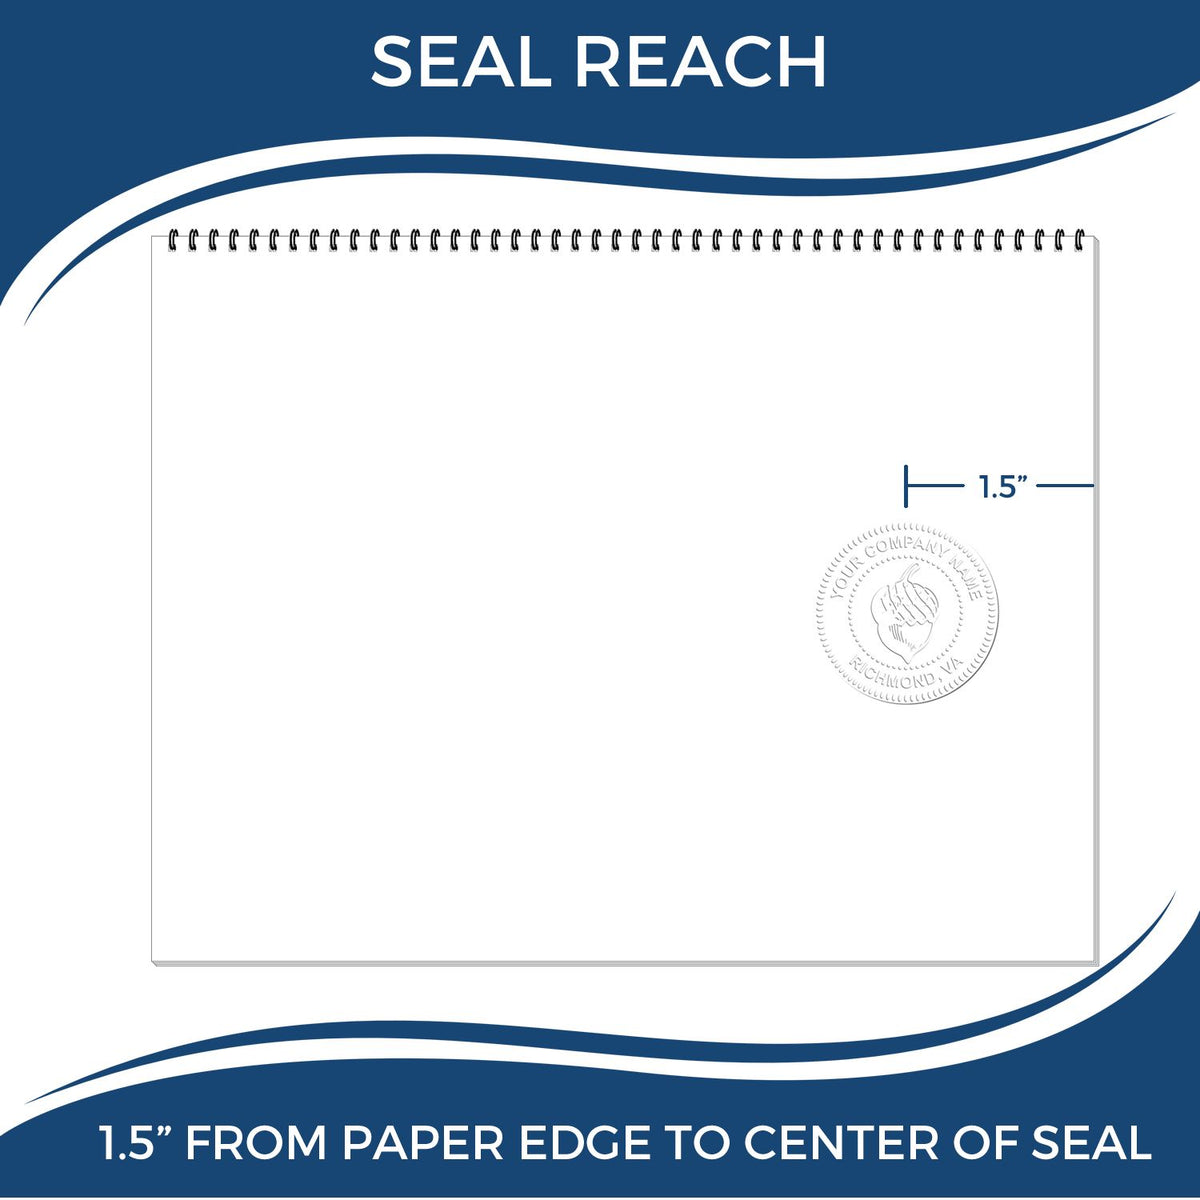 An infographic showing the seal reach which is represented by a ruler and a miniature seal image of the Soft Mississippi Professional Geologist Seal